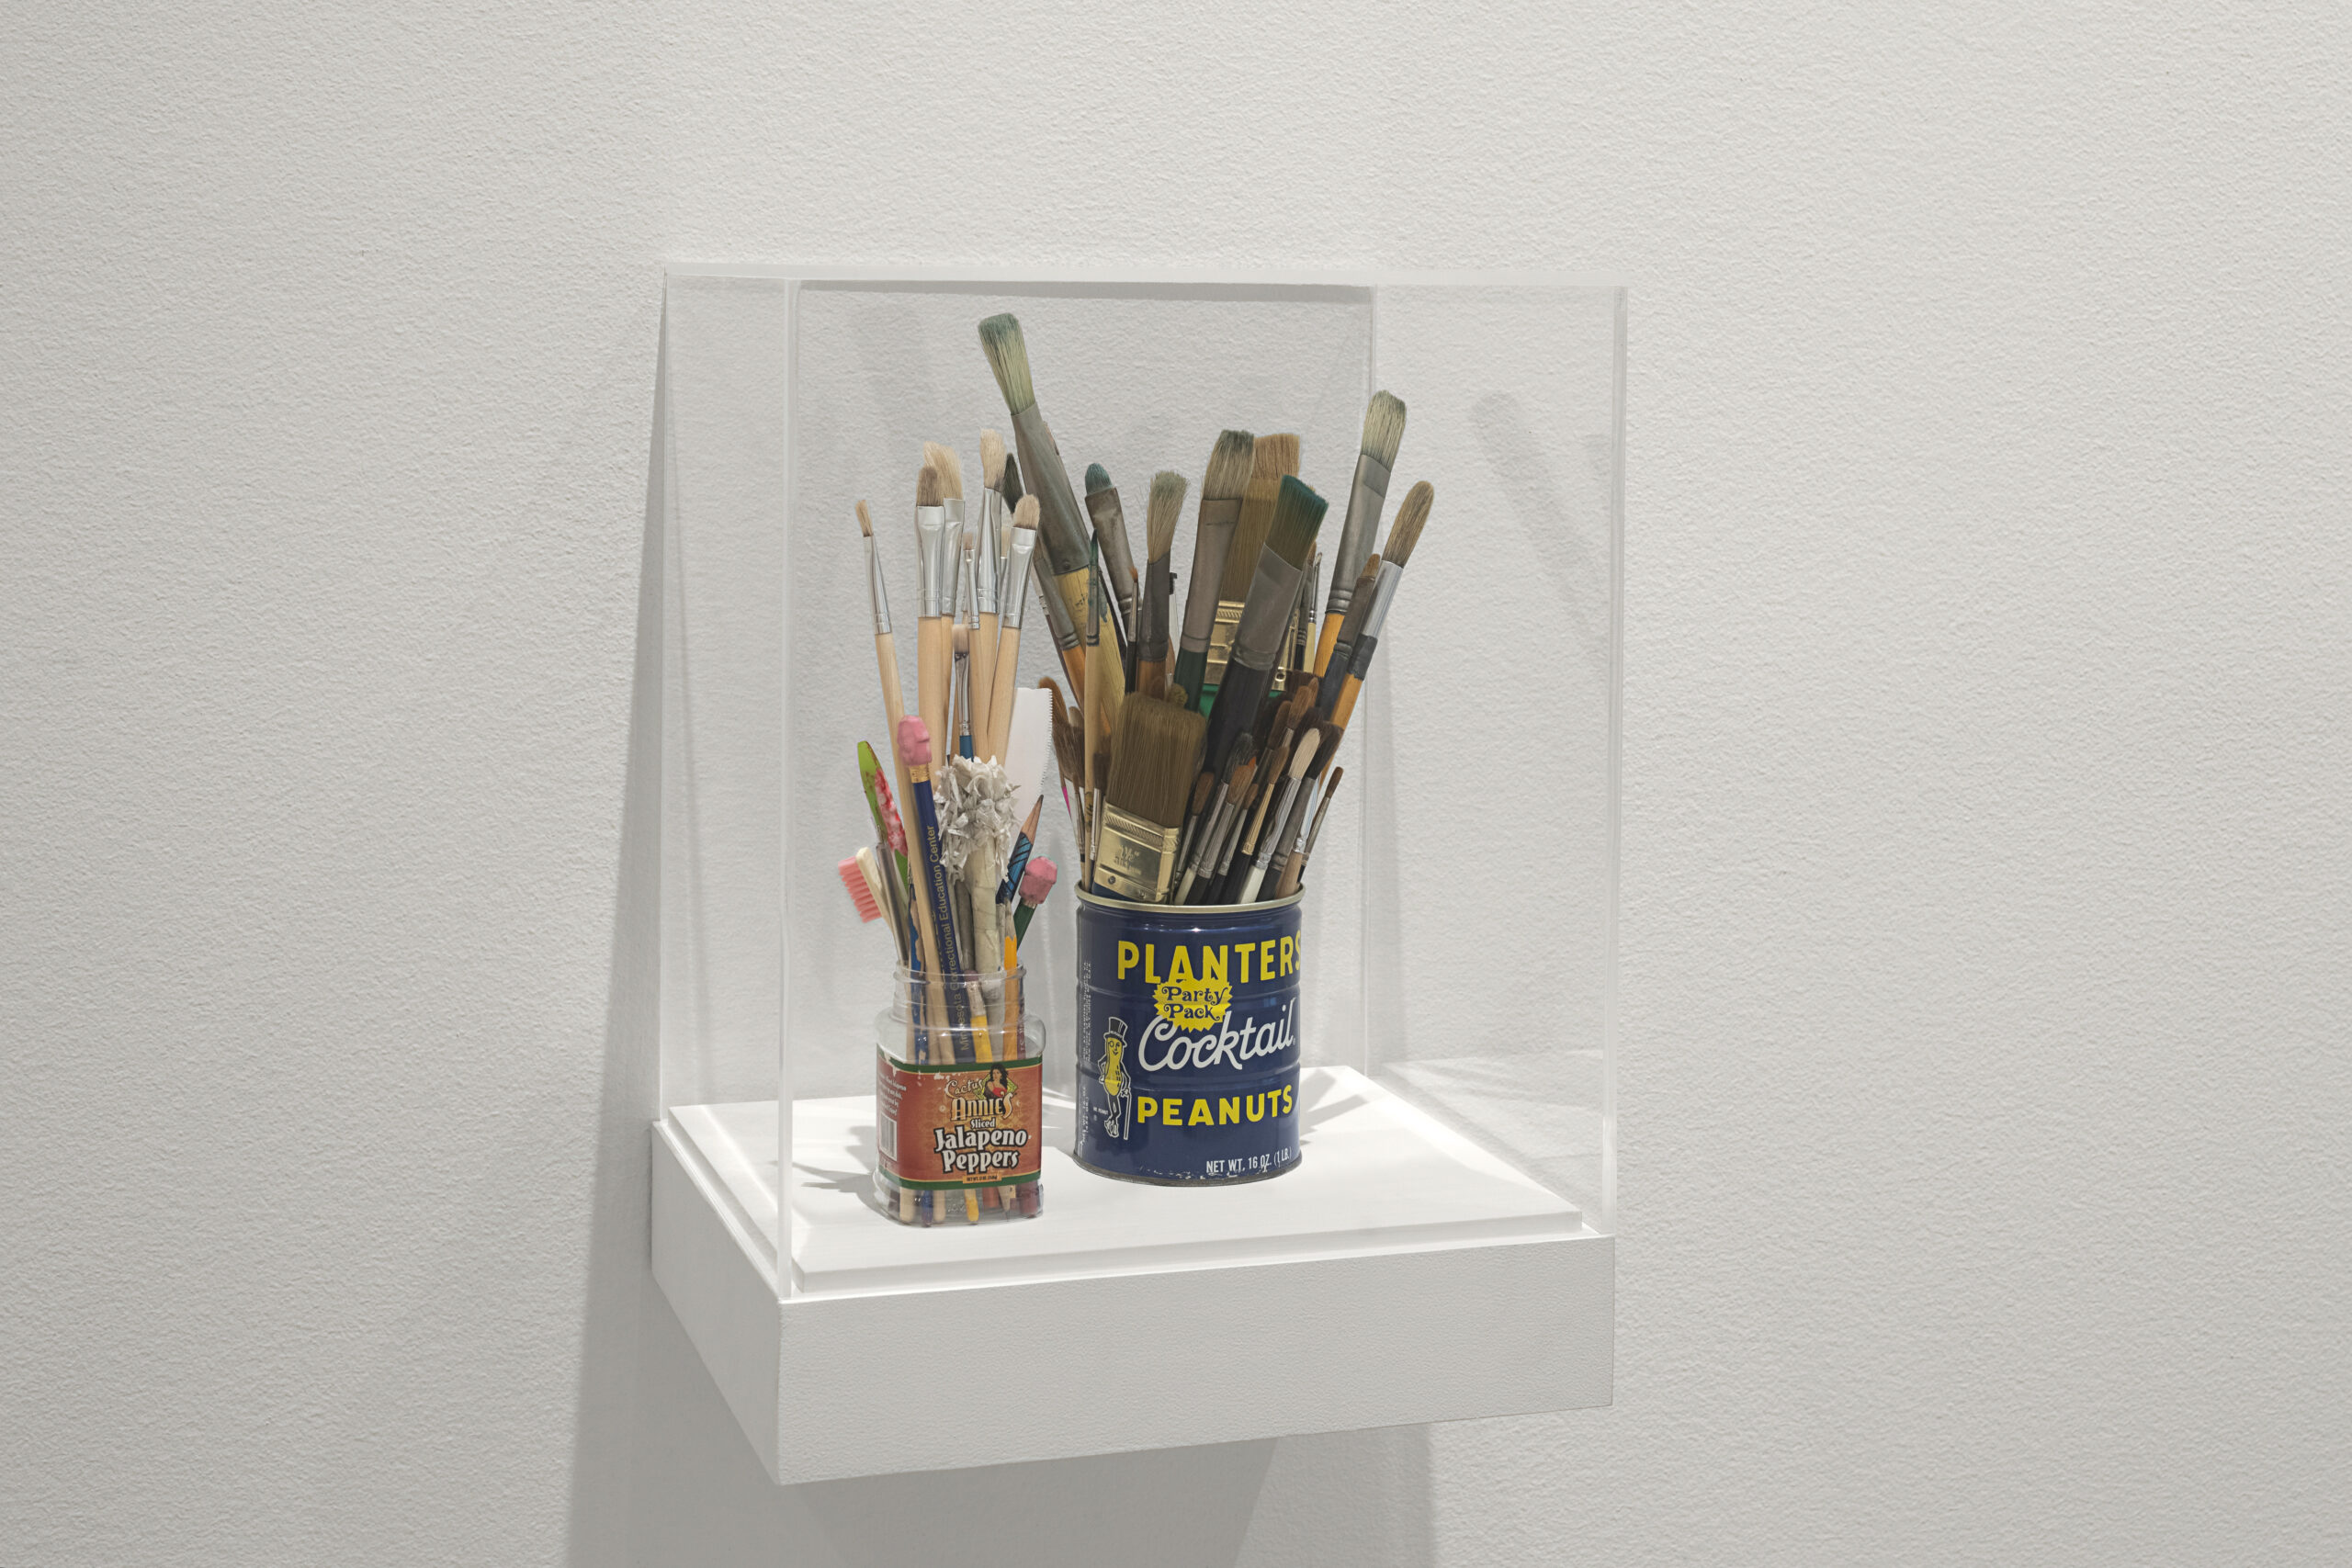 Two cans of paintbrushes housed within a glass box atop a stolid white shelf.